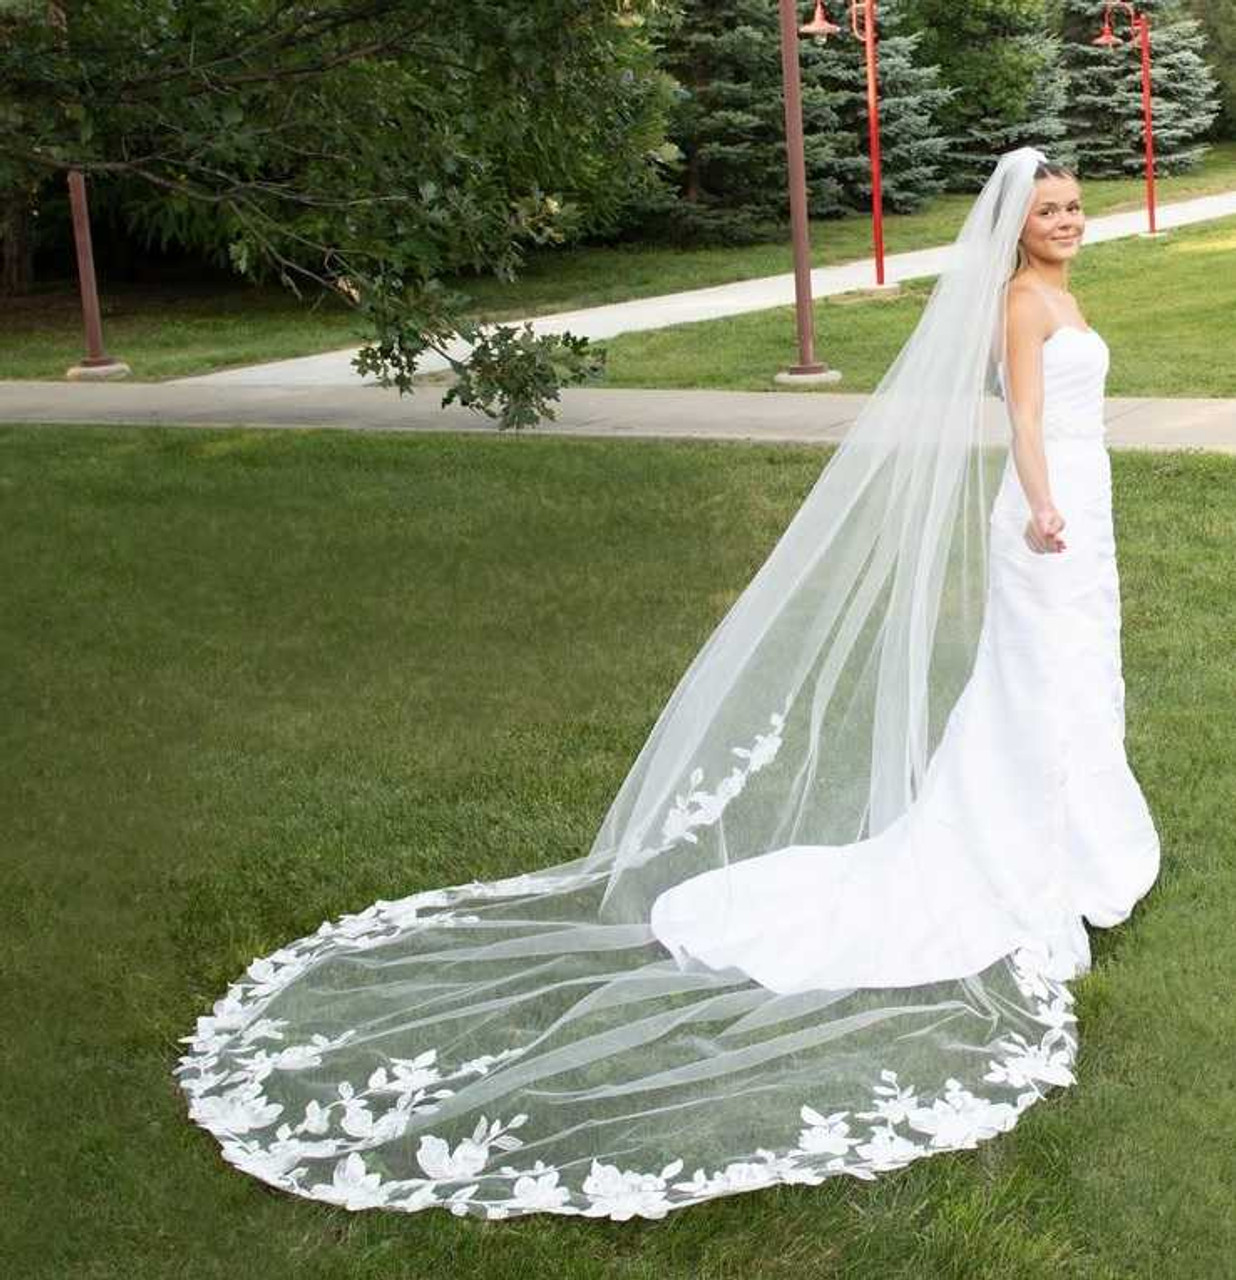 https://cdn11.bigcommerce.com/s-zb3qt33o/images/stencil/1280x1280/products/19883/61268/Royal-Cathedral-Wedding-Veil-with-Beaded-Lace-Edge-CF280_61253__32670.1692629633.jpg?c=2